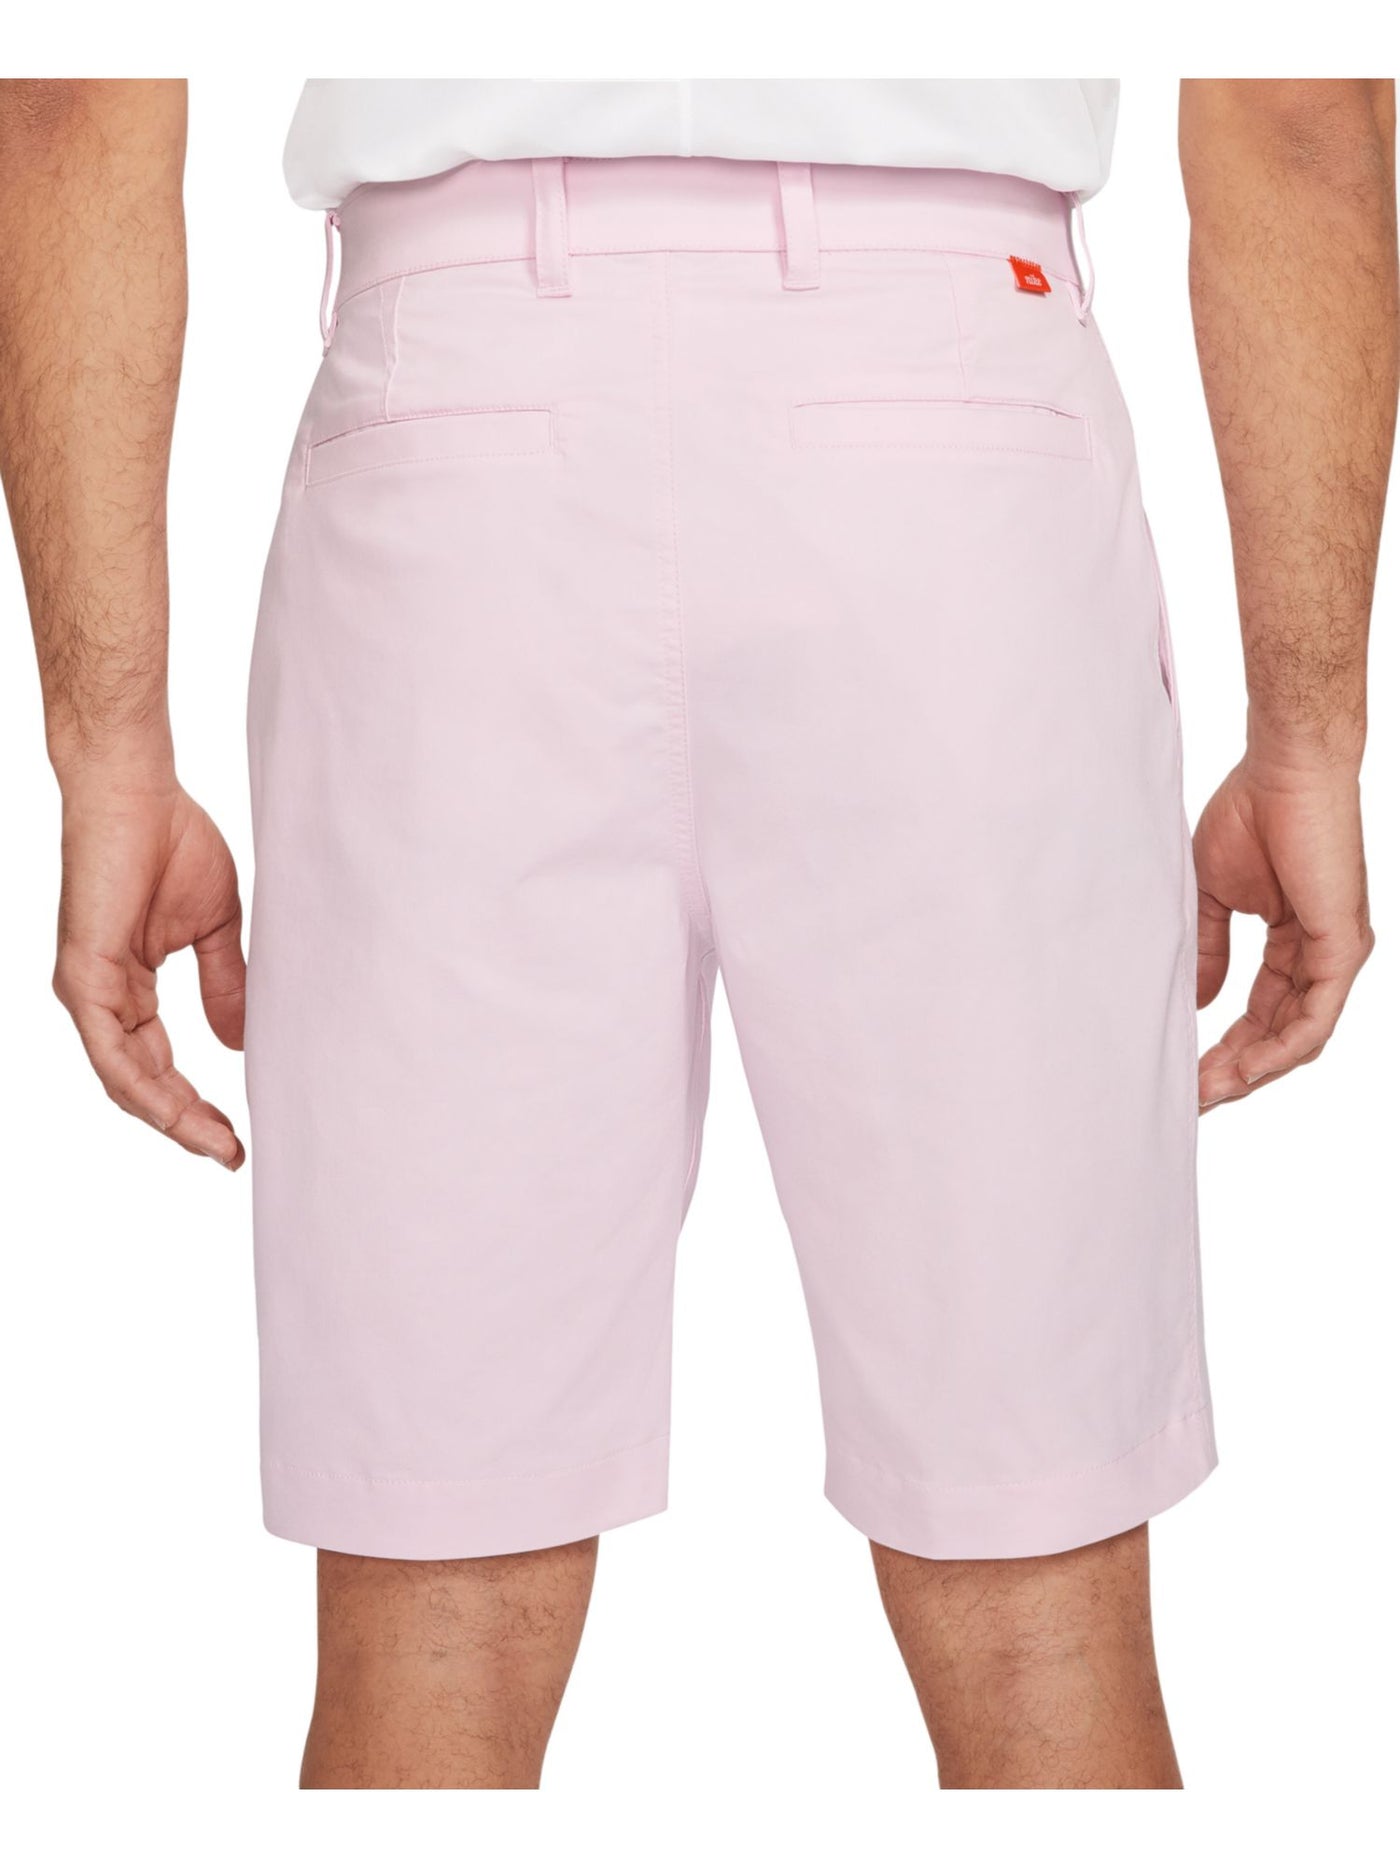 NIKE Mens Golf Pink Classic Fit Moisture Wicking Chino Shorts 30